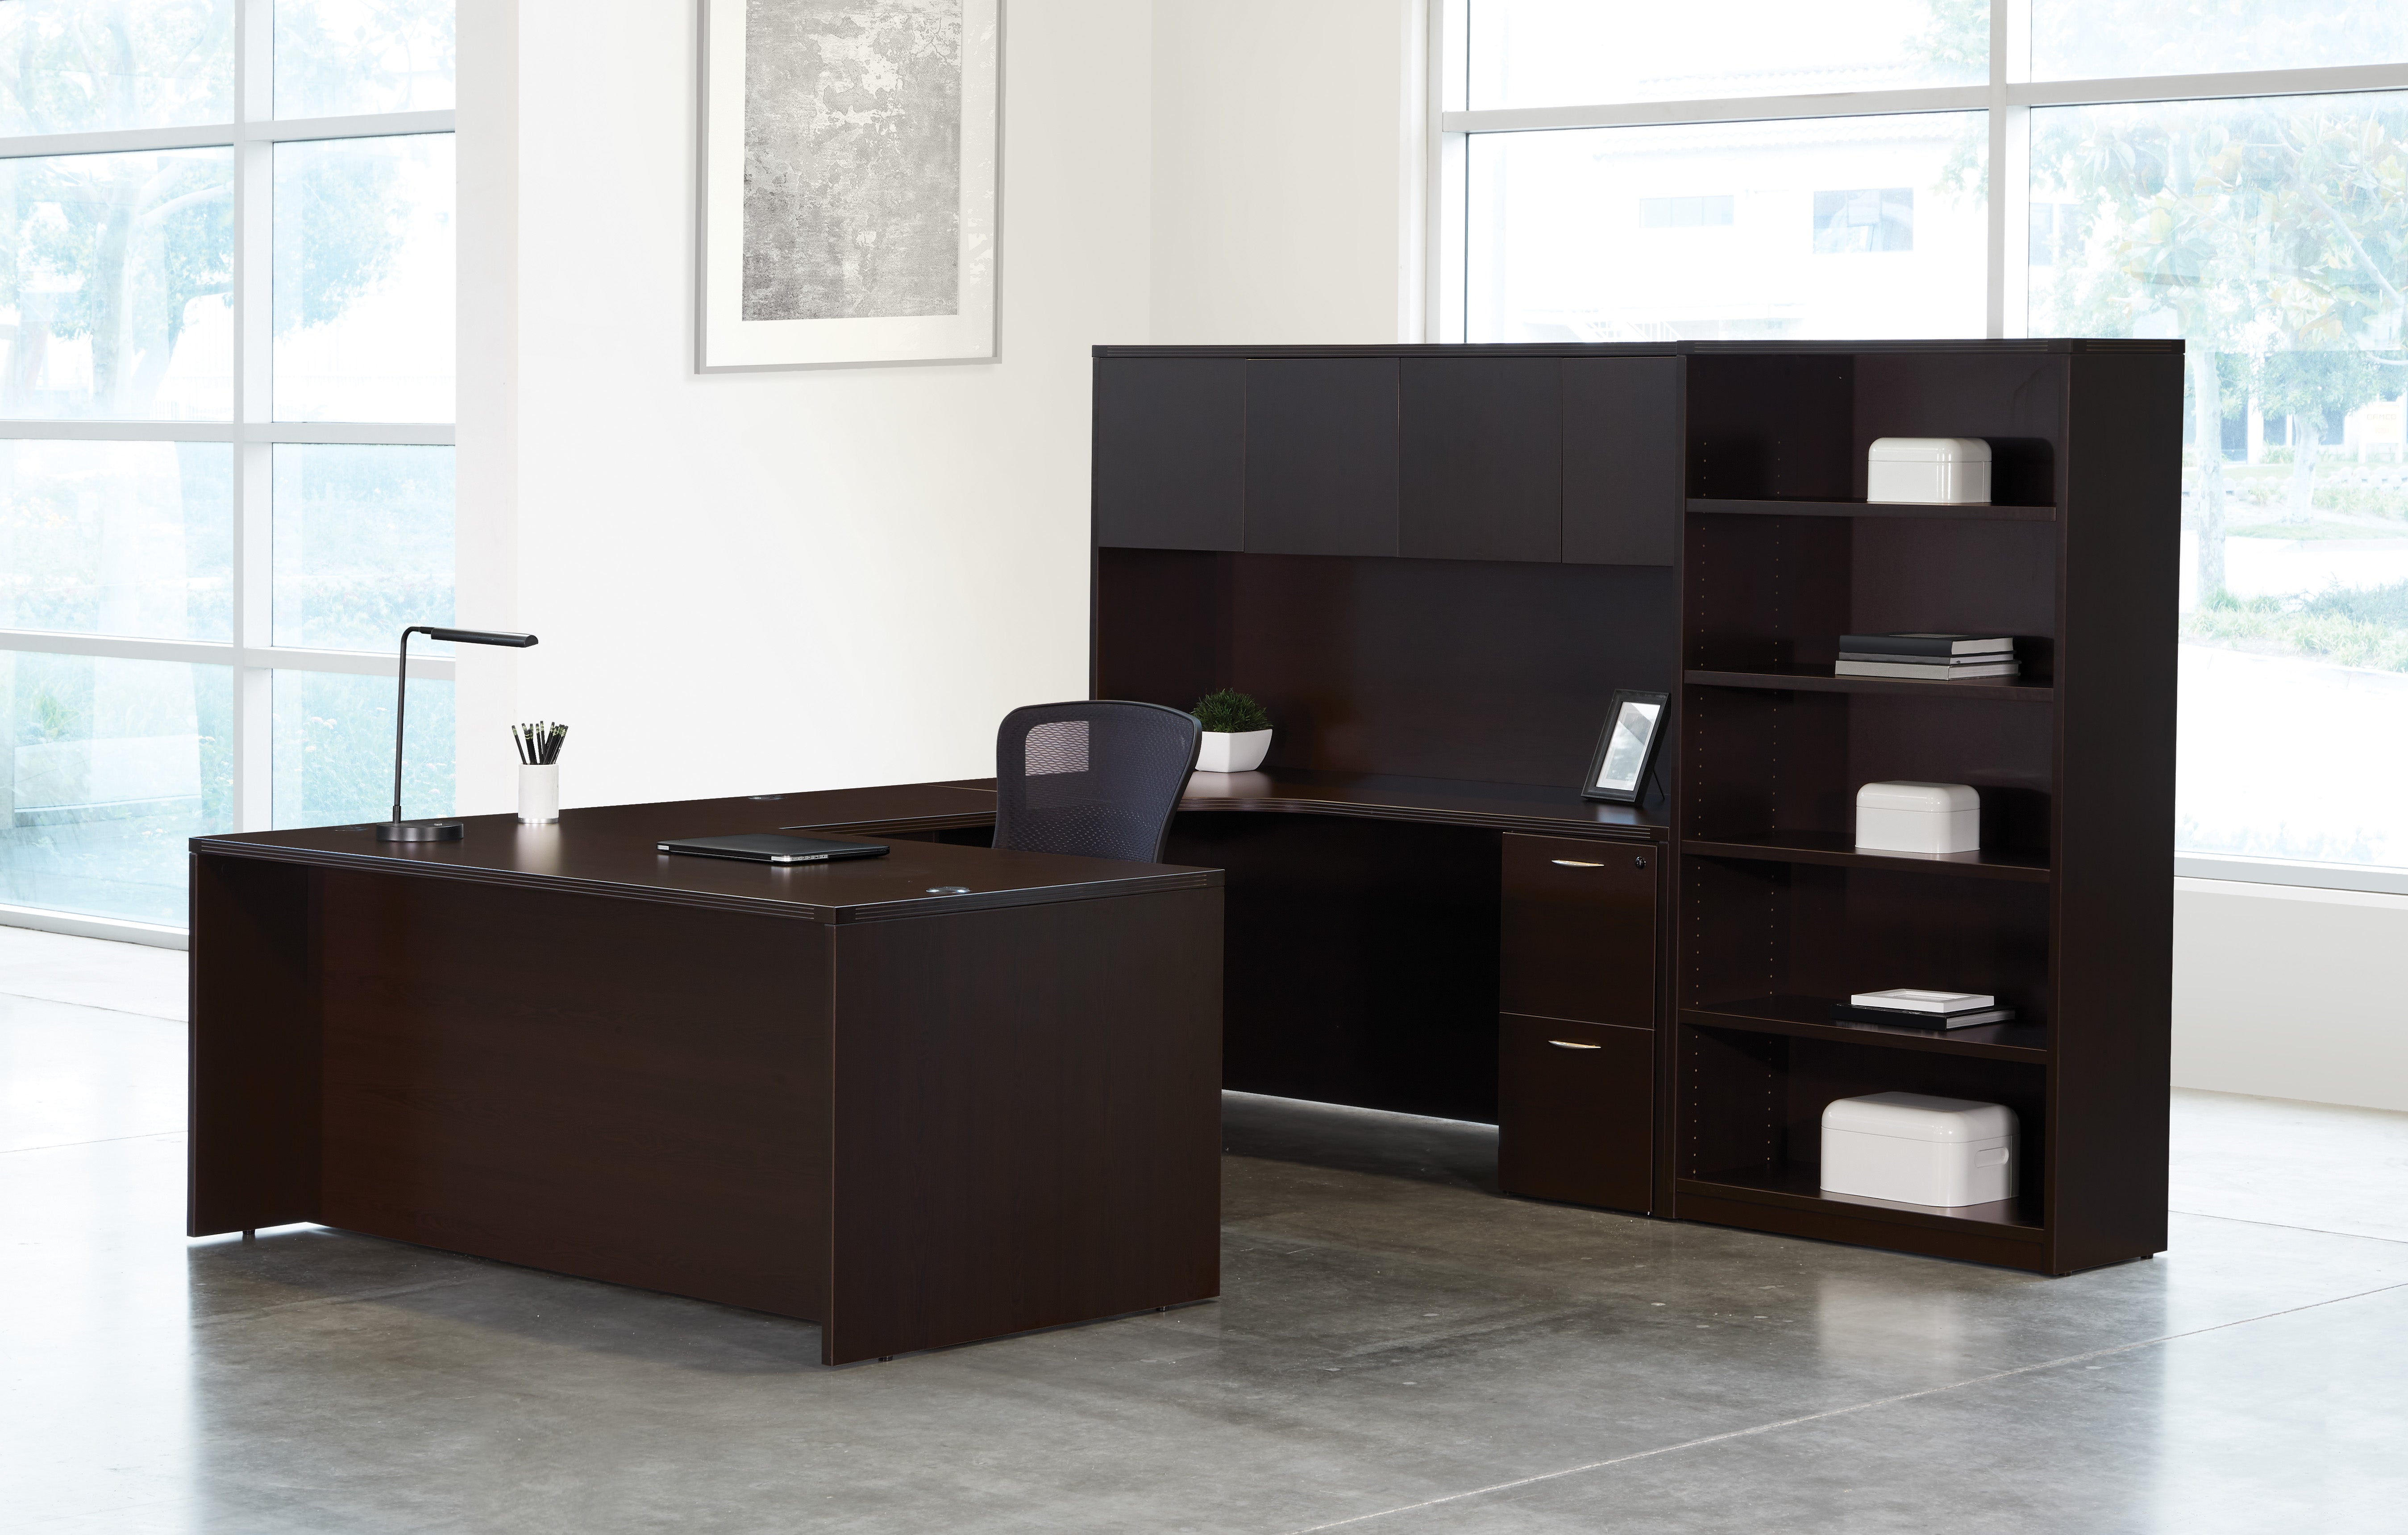 NAP-TYP14 - Napa Series U Shaped Desk w/Hutch and Bookcase by OSP